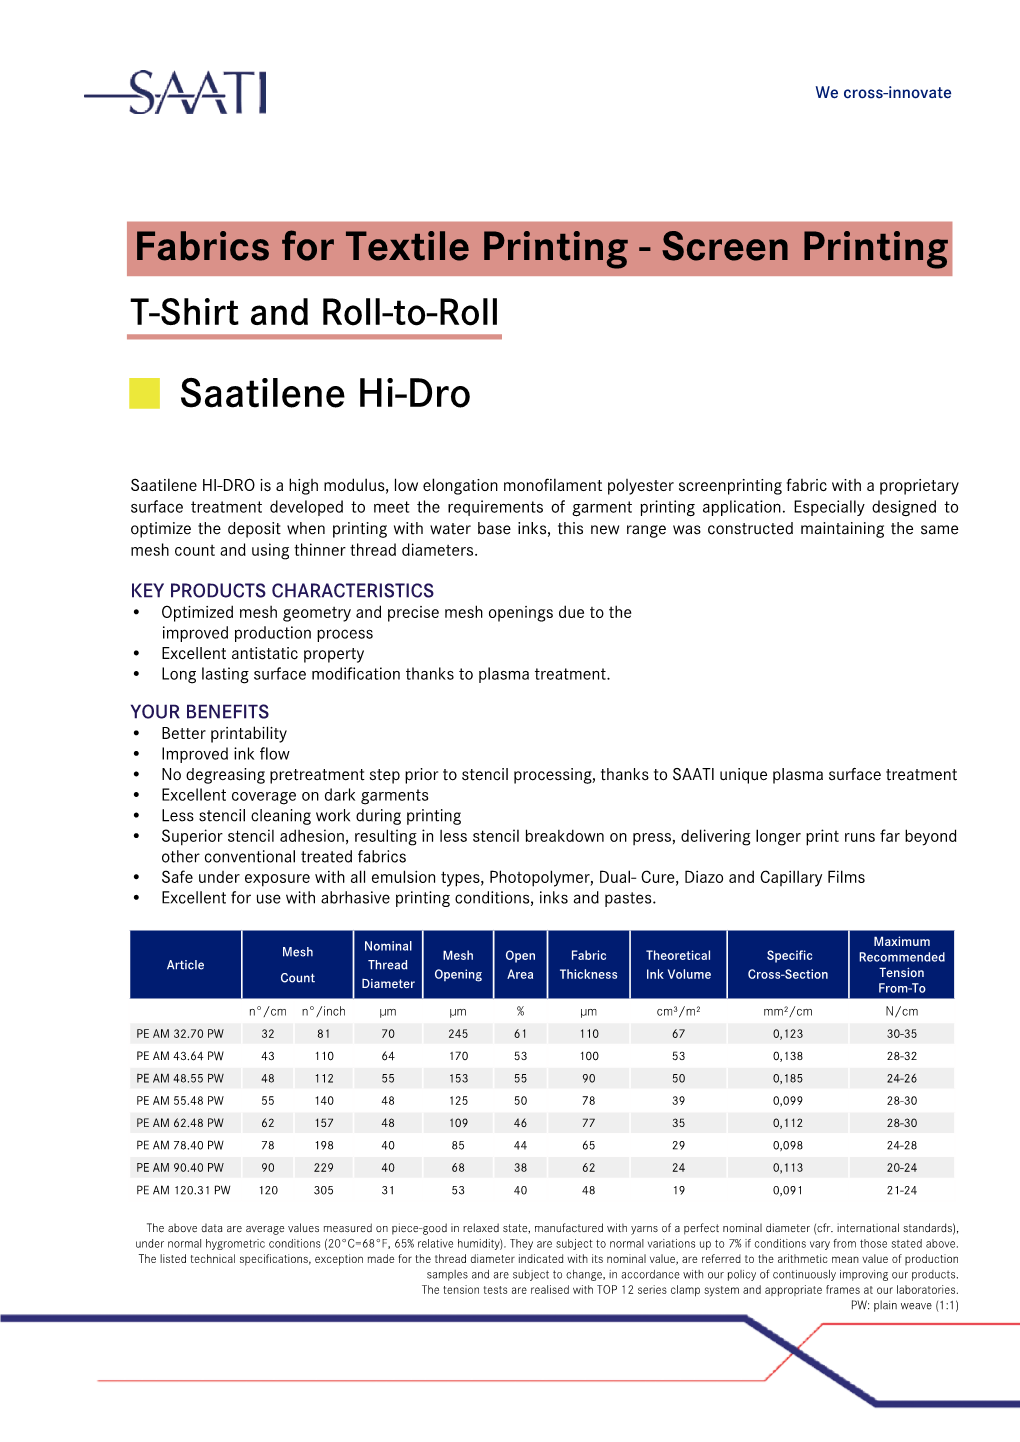 Fabrics for Textile Printing - Screen Printing T-Shirt and Roll-To-Roll Saatilene Hi-Dro